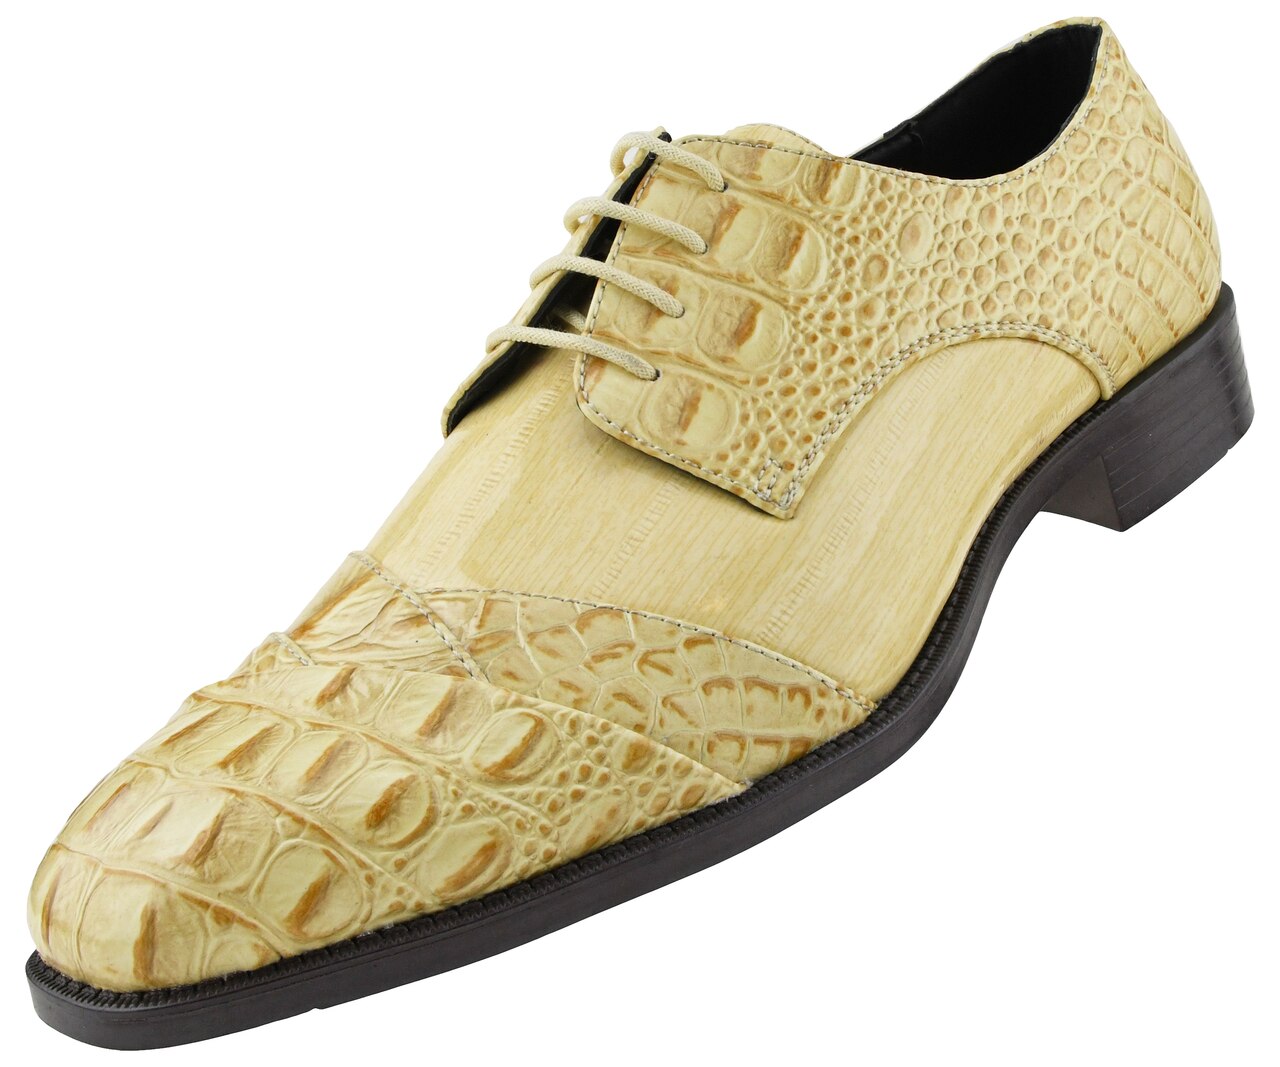 Men Dress Shoes-Alligator-Taupe | Church suits for less